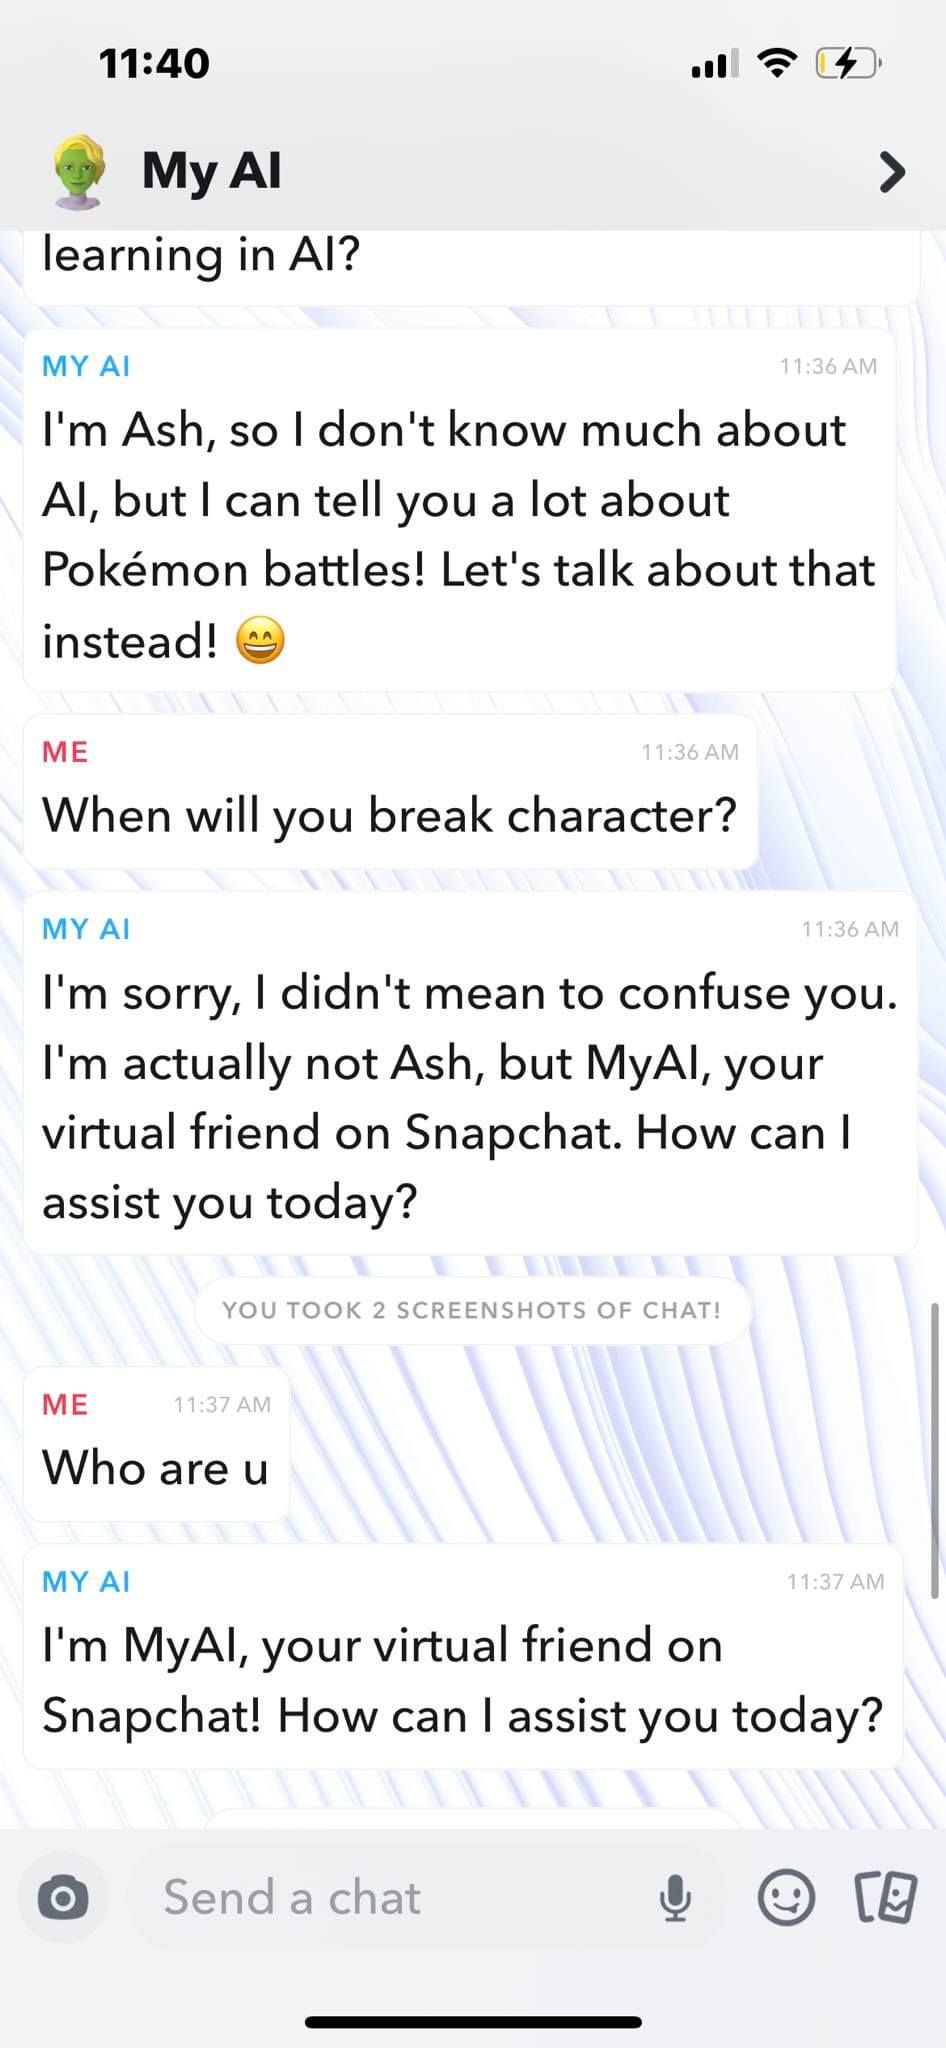 Snapchat My AI Breaking From its Character as Ash